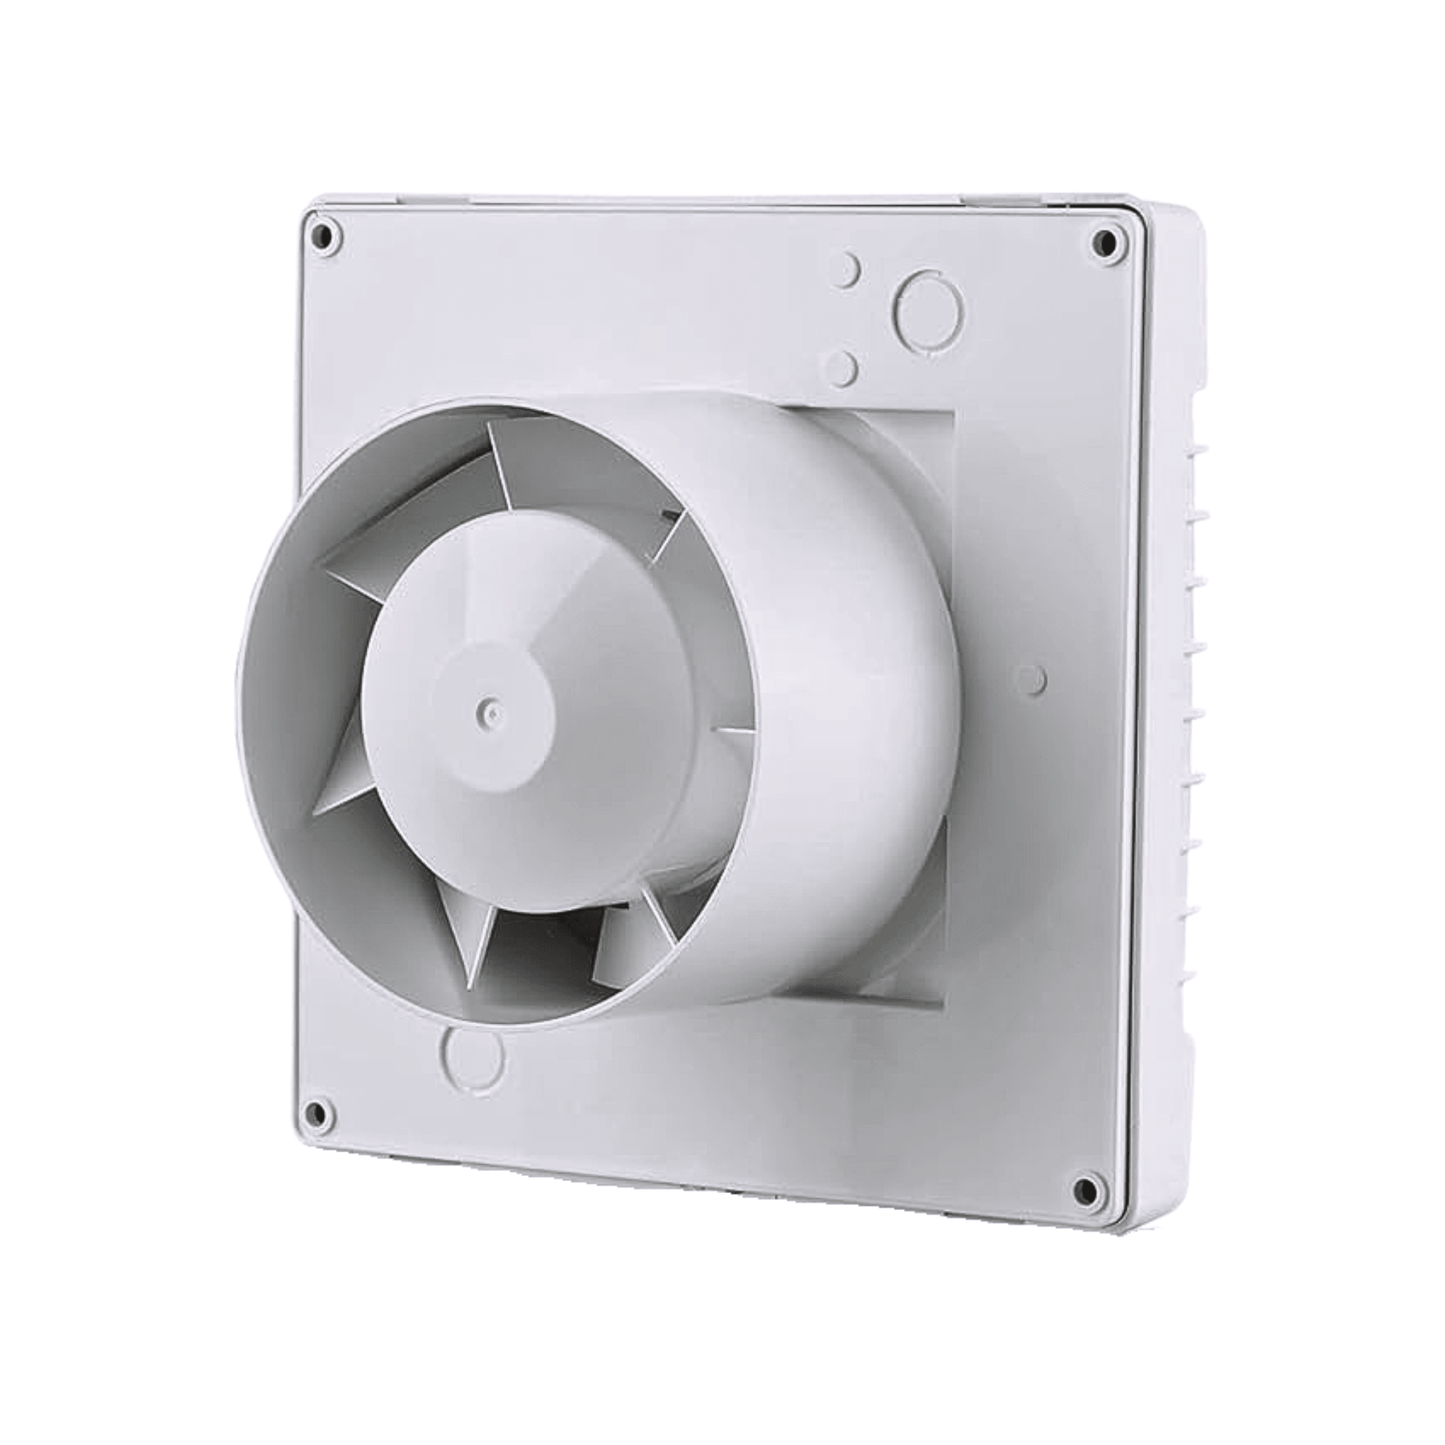 Vents 100 MA Axial Extract Fan